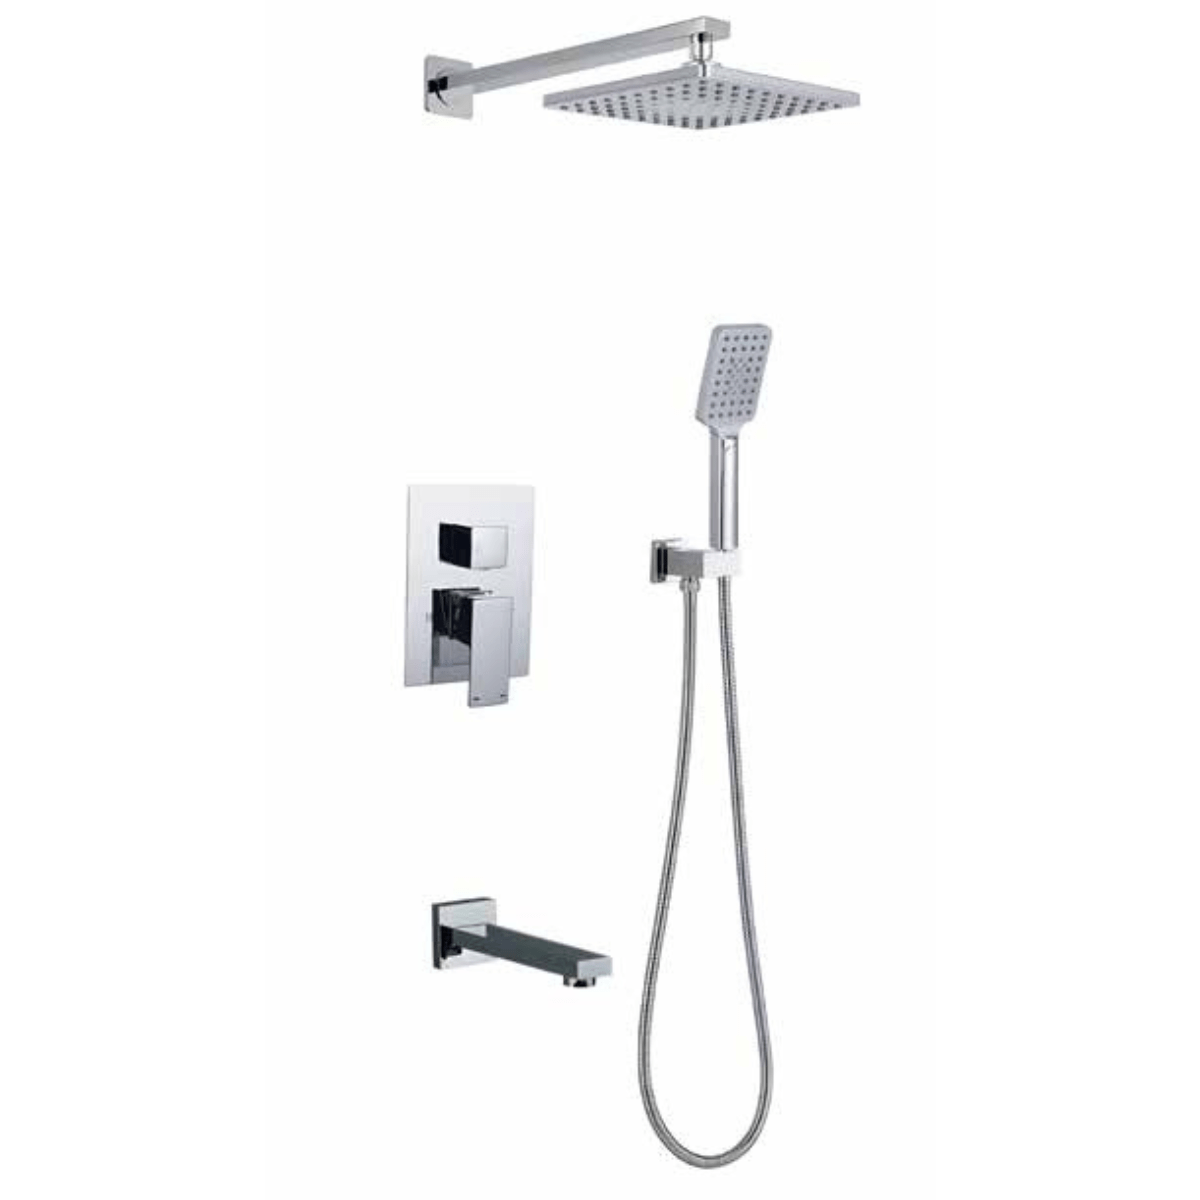 Buy Bathroom Chrome Concealed Wall Mounted Three-Function Square Overhead Rain Shower Set - WK-K-8416 | Shop at Supply Master Accra, Ghana Shower Set Buy Tools hardware Building materials